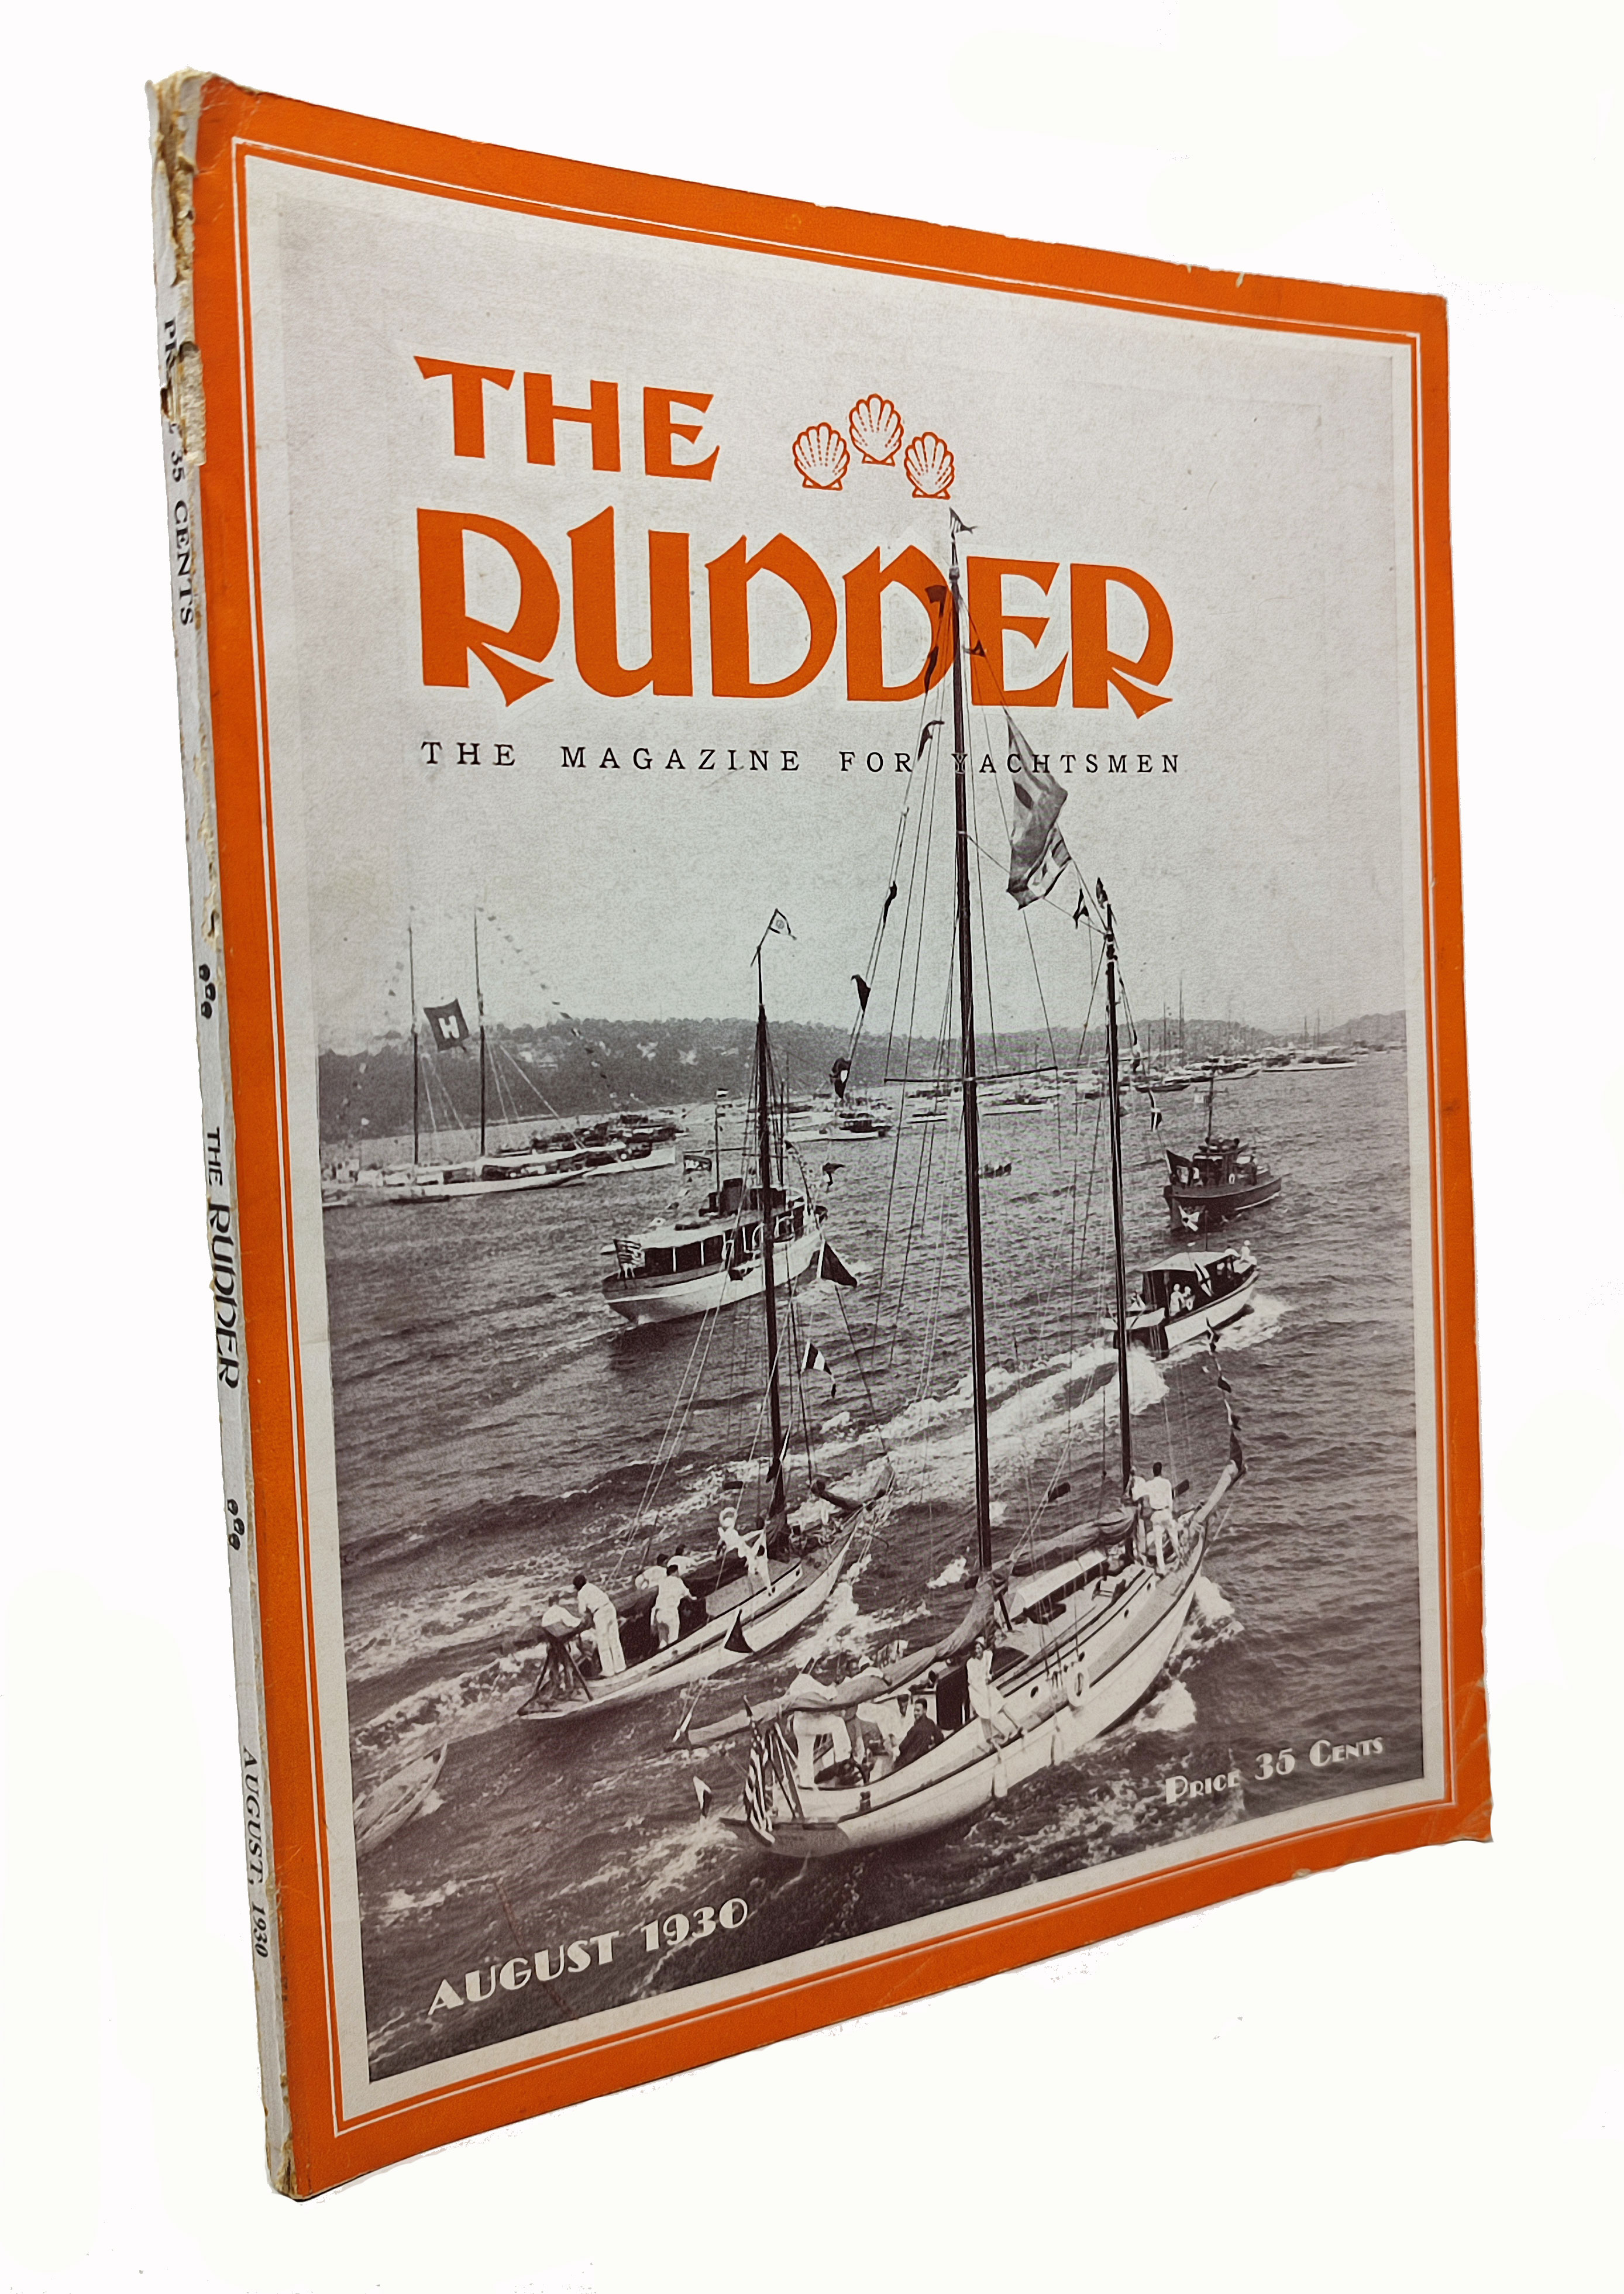 THE RUDDER / the Magazine for Yachtsmen (AUGUST 1930)